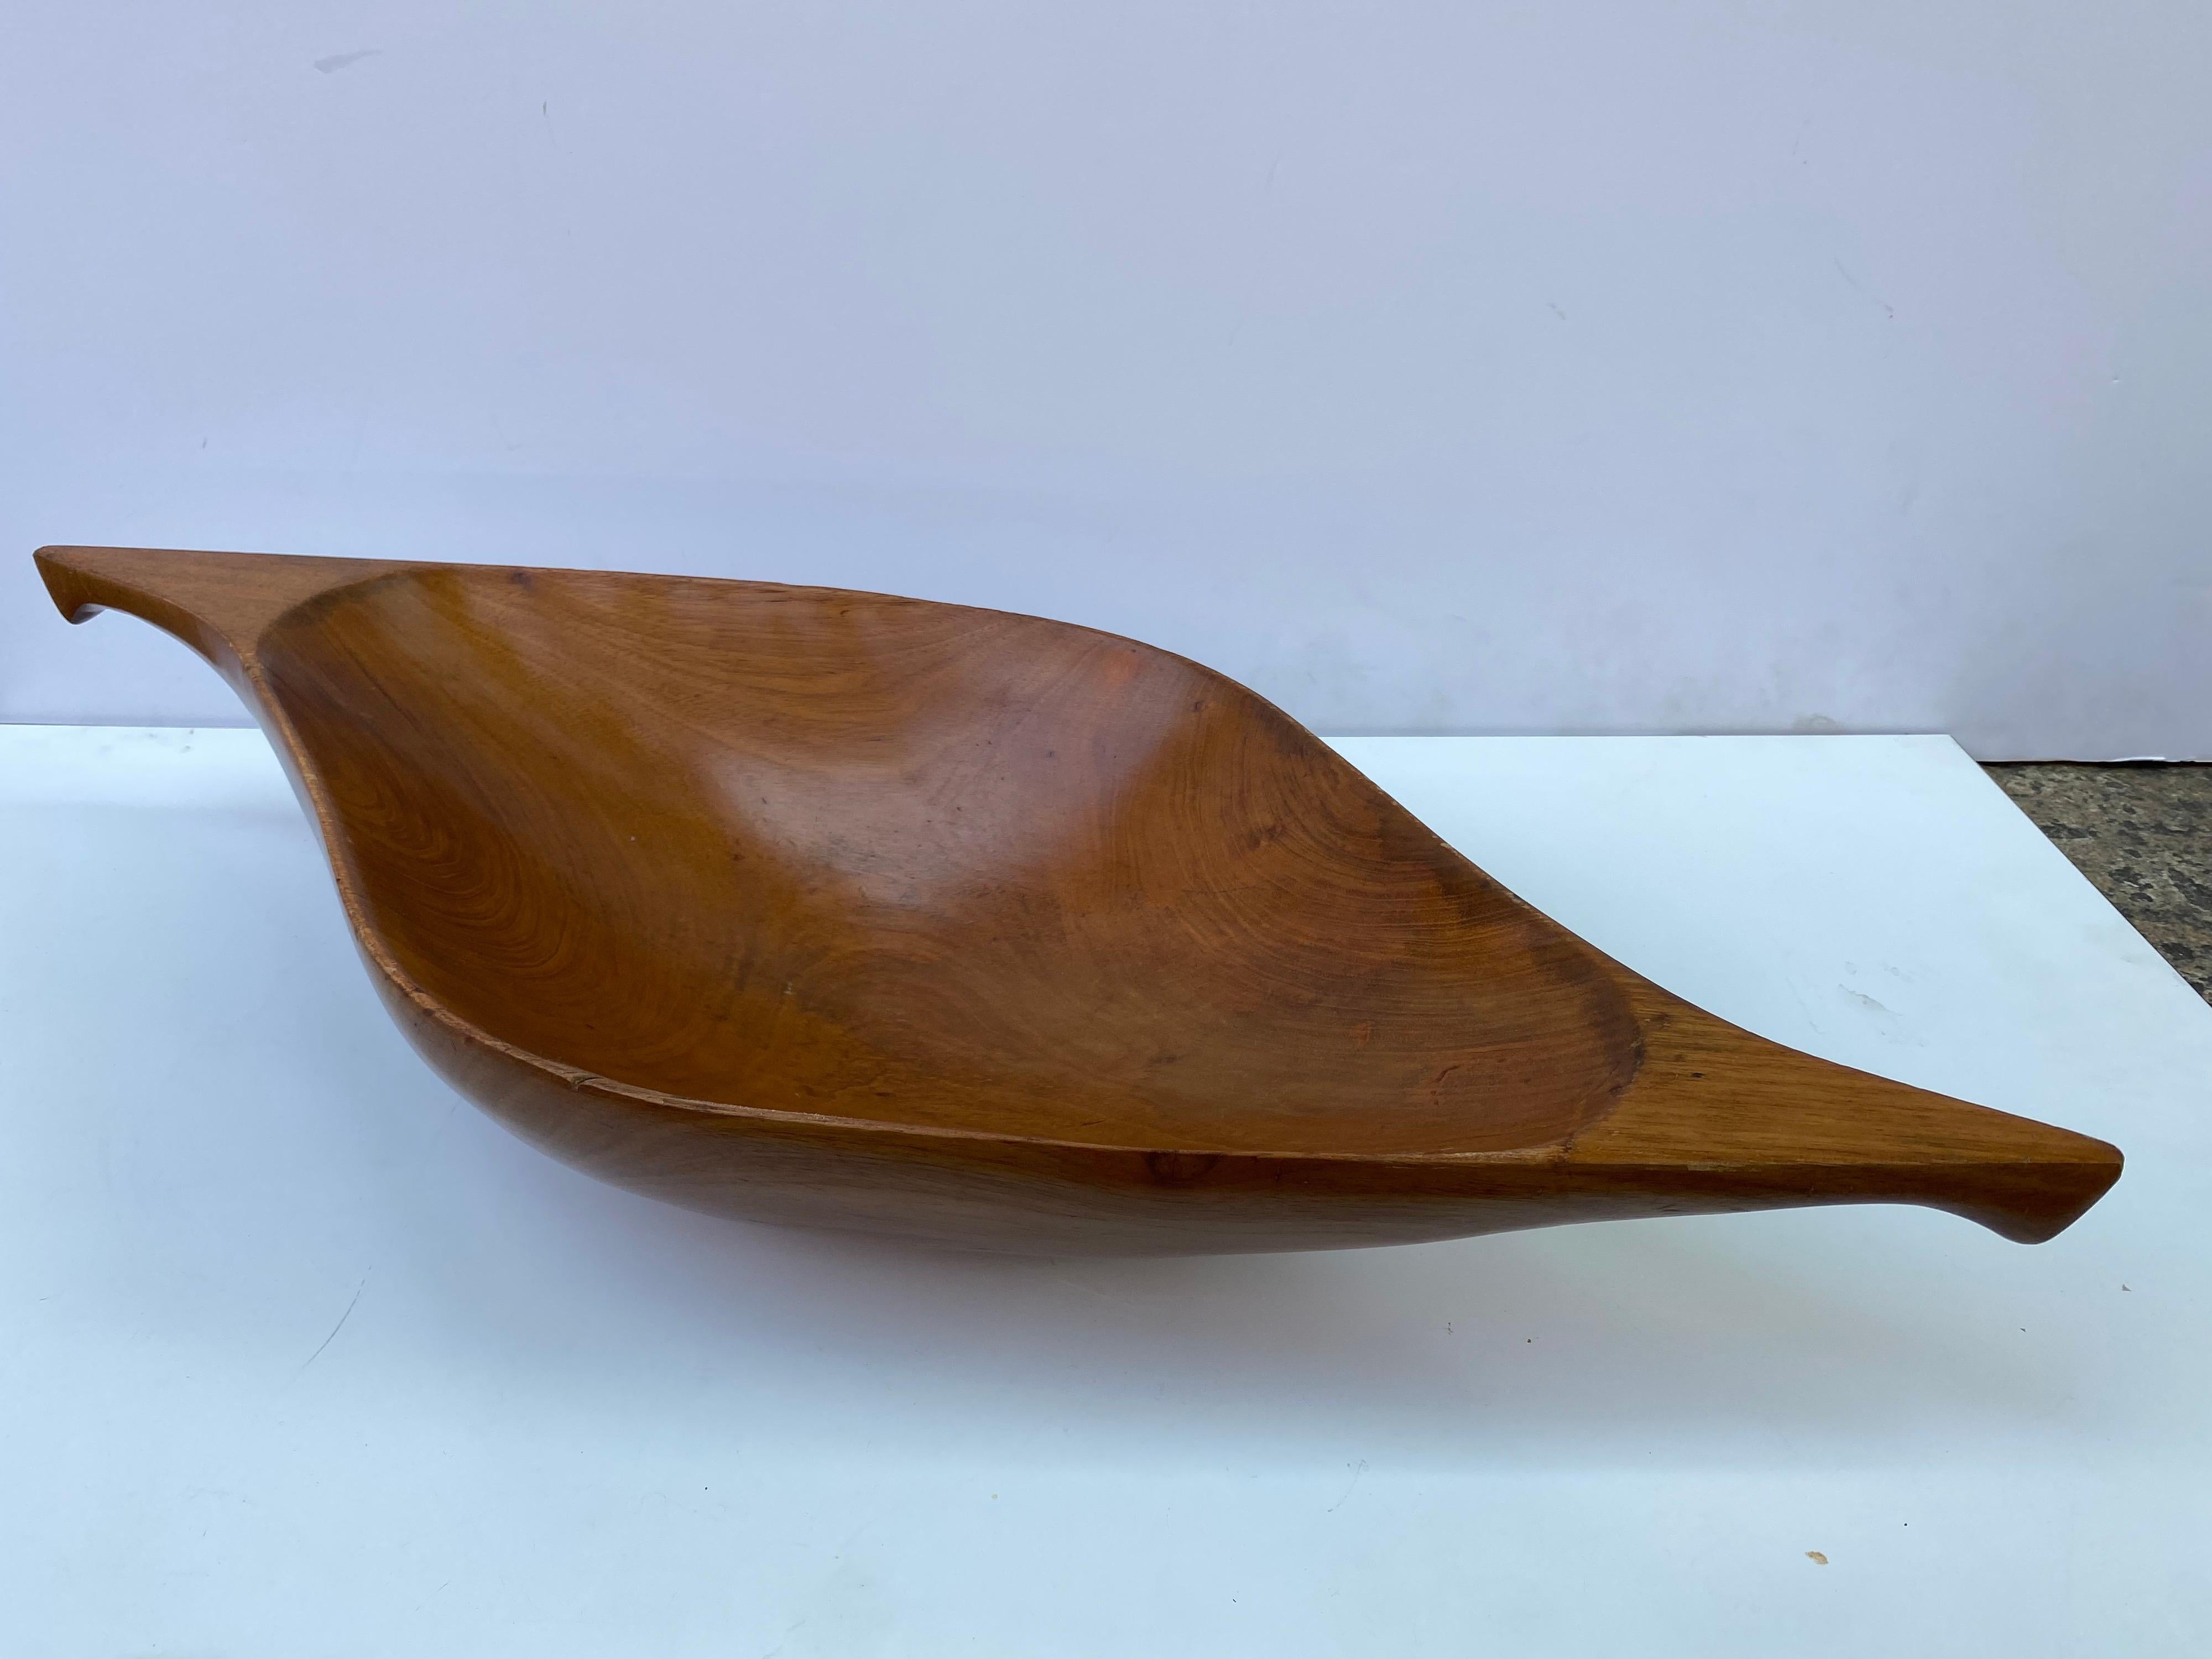 Arthur Umanoff large center bowl, Taverneau canoe bowl produced in Haiti and retailed through Raymor. Has a couple dings but overall still very nice! great scale and size!